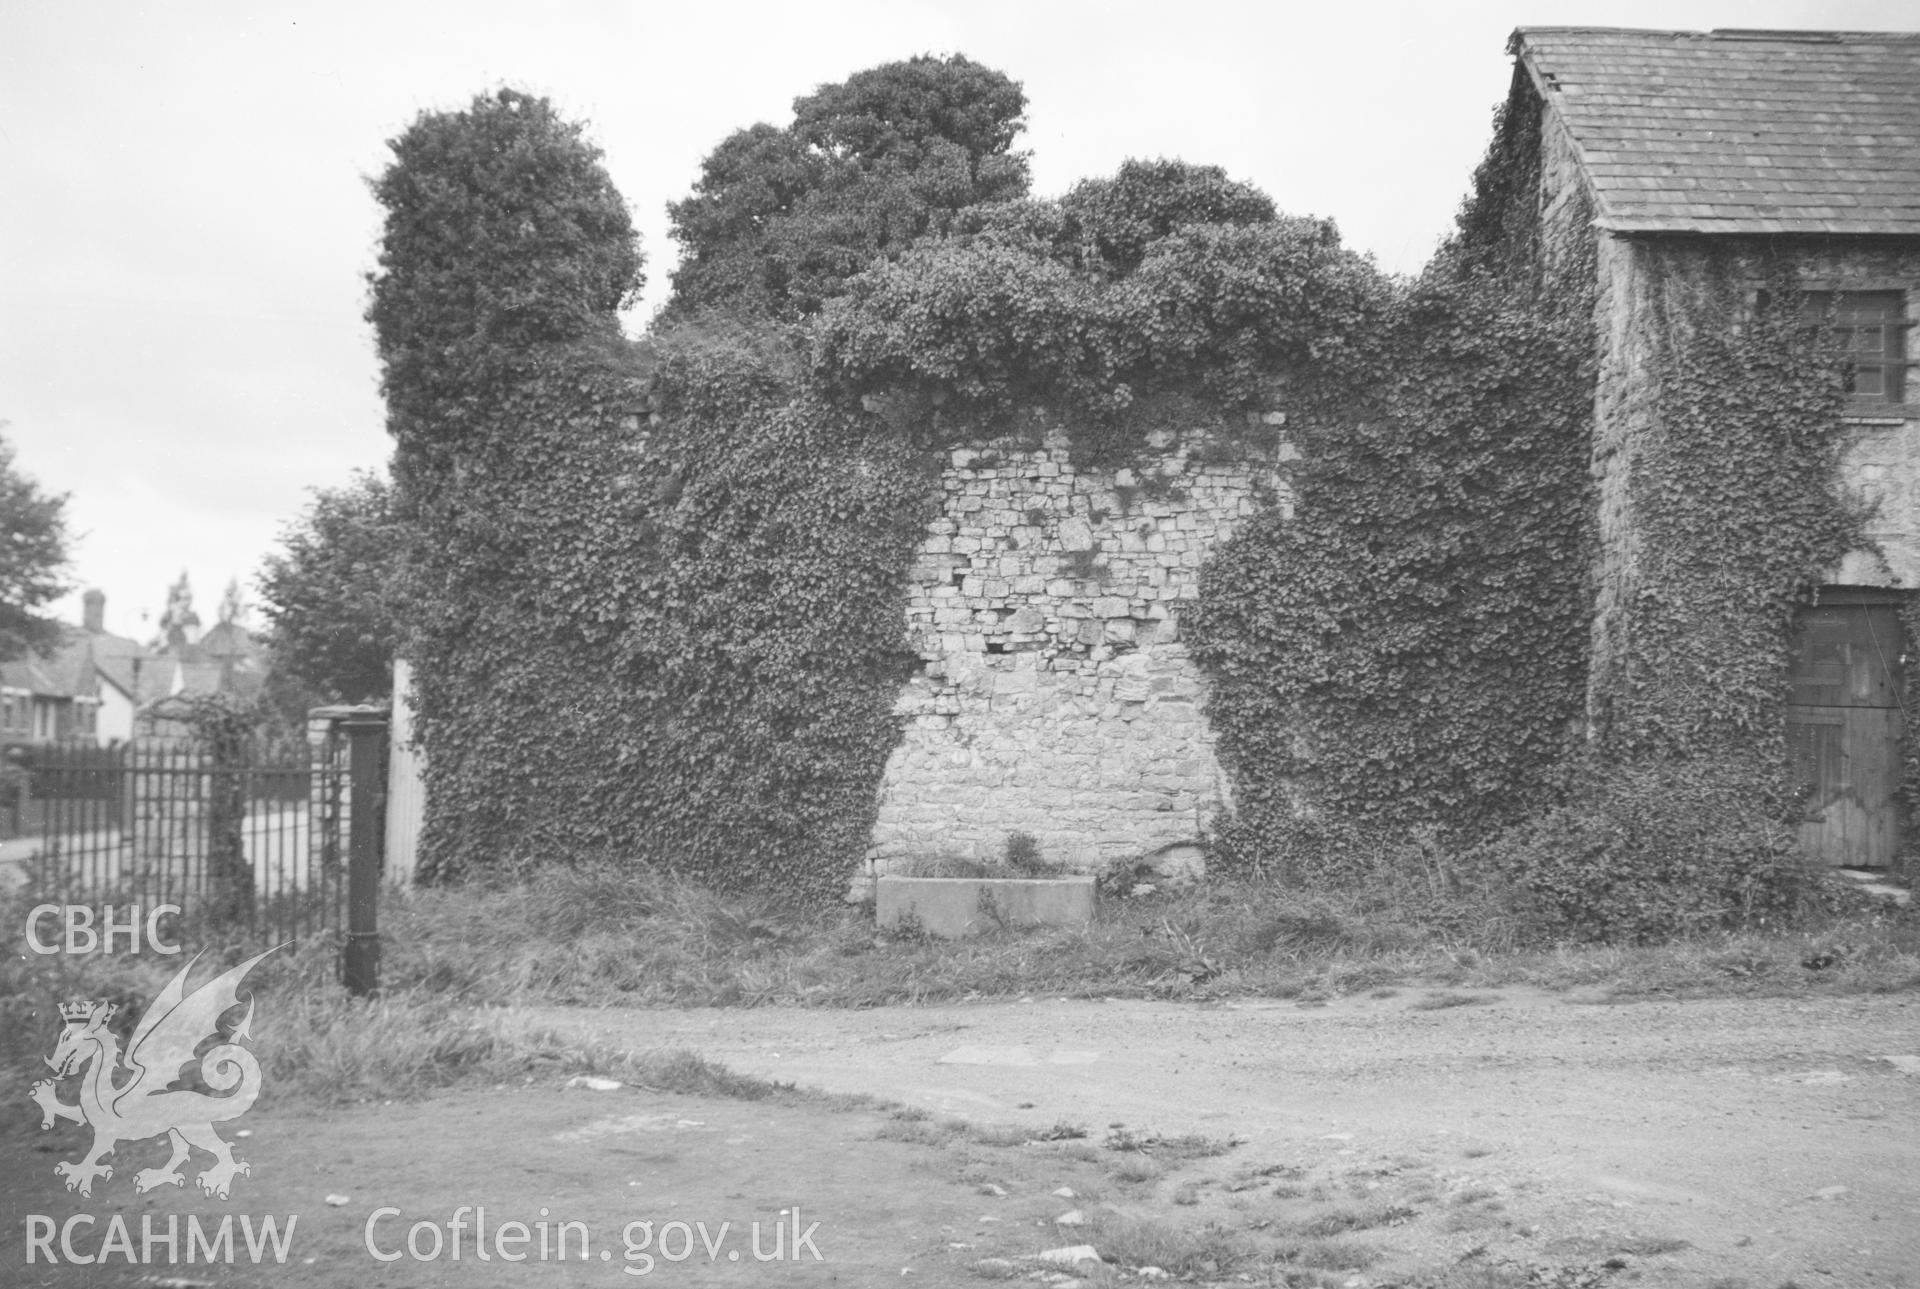 Digital copy of a nitrate negative showing Barry Castle. From the Cadw Monuments in Care Collection.